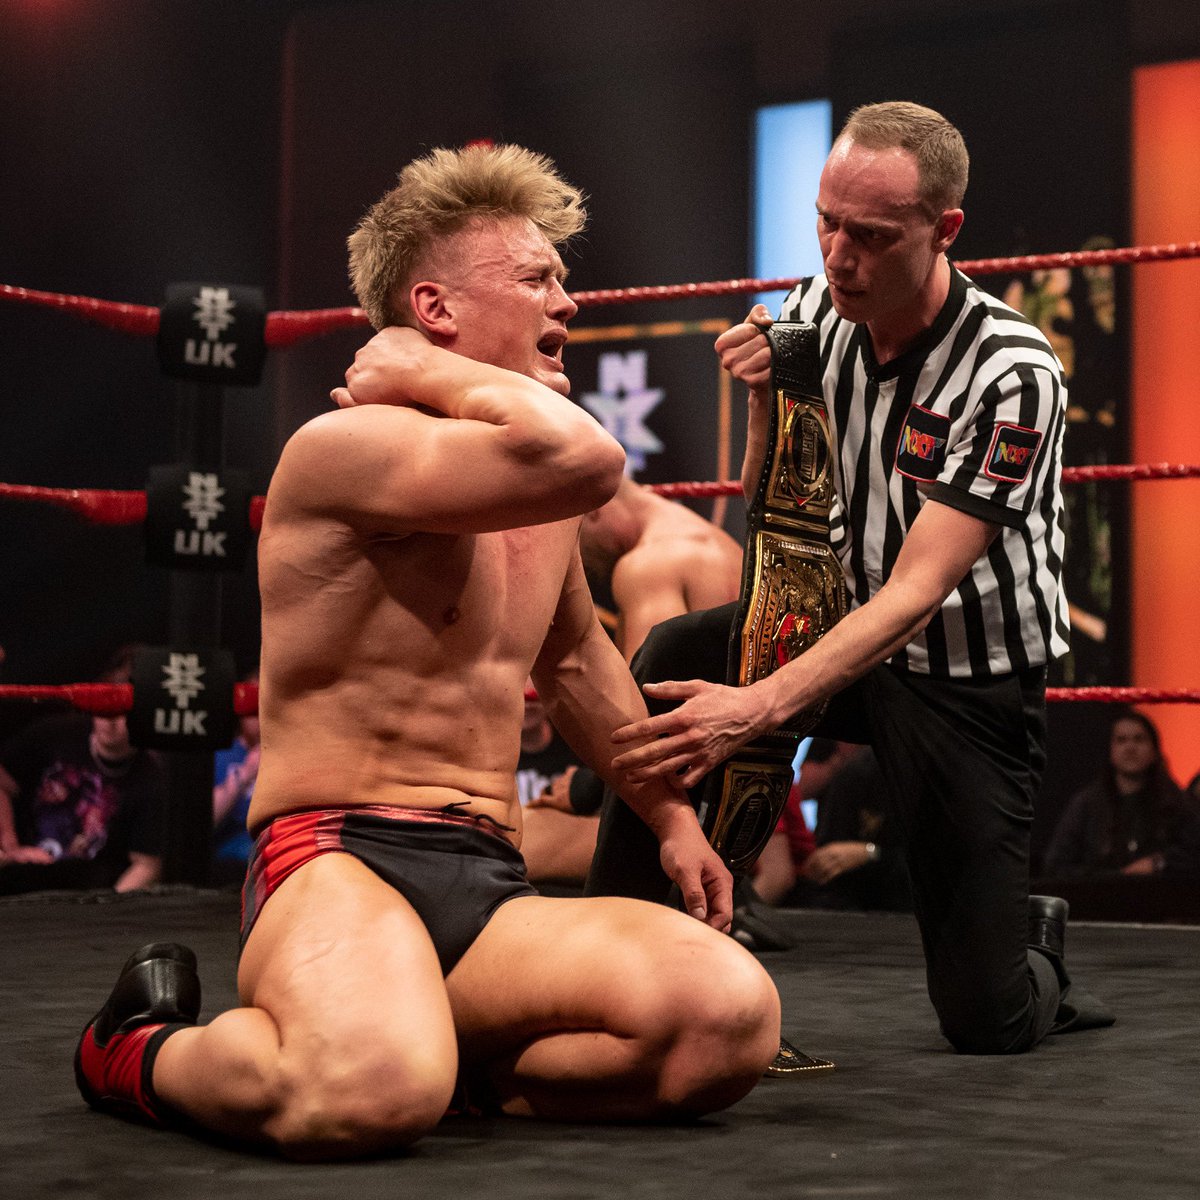 May 12, 2022: At the BT Sport Studios, @UNBESIEGBAR_ZAR defeated @jd_mcdonagh in a Loser Leaves #NXTUK Championship Match. The Irish Ace thought he had won earlier but GM Johnny Saint ruled the match to resume due to Th Czar's foot being on the rope during the 3-count. 📸 WWE